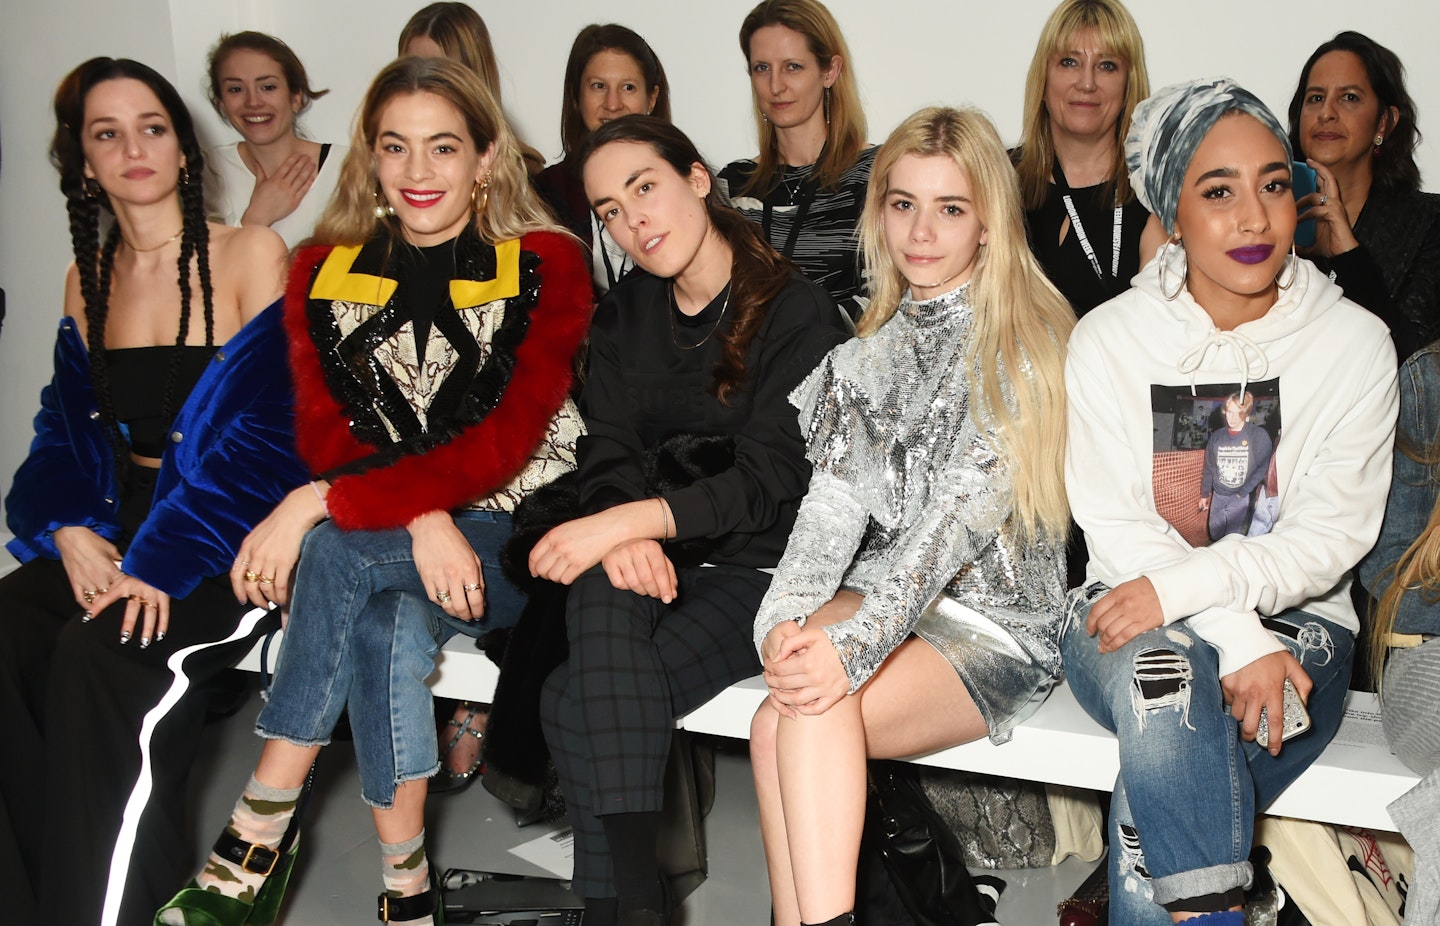 LFW FROW